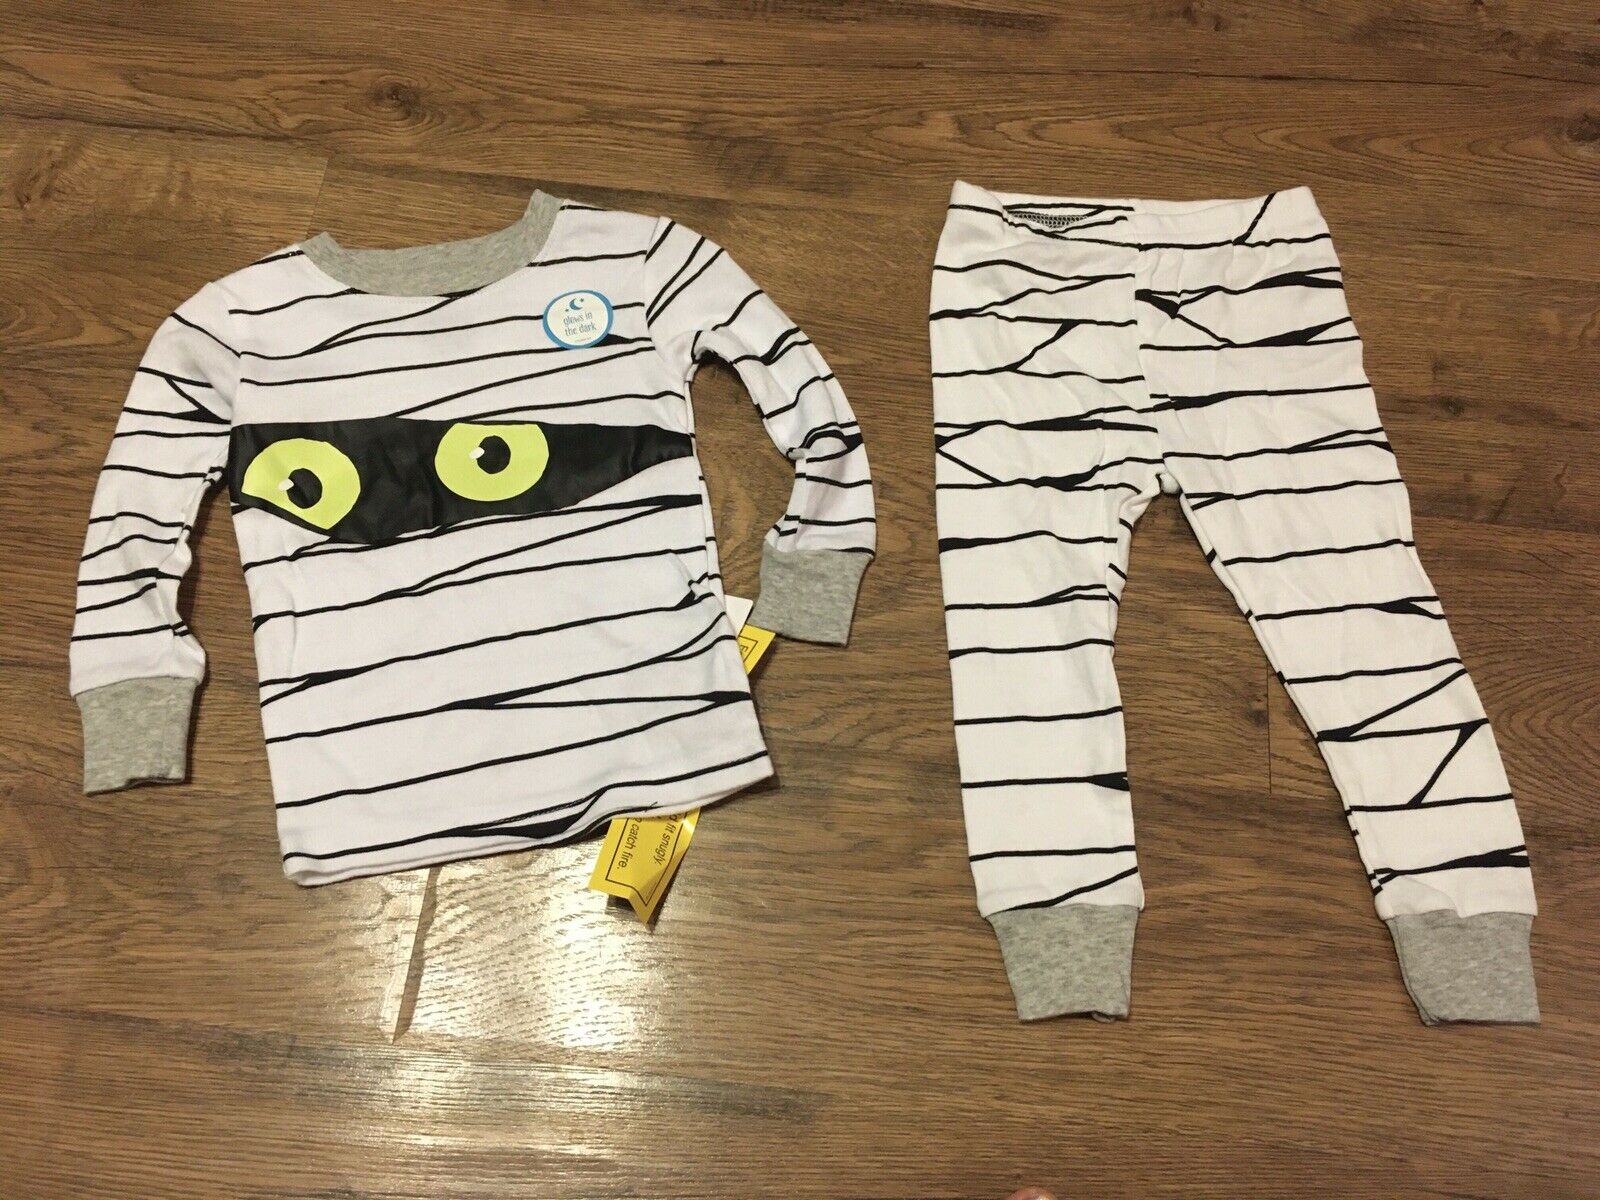 Nwt~toddler Boys Pajamas Halloween Mummy Glow In The Dark~size 18 Months~carters